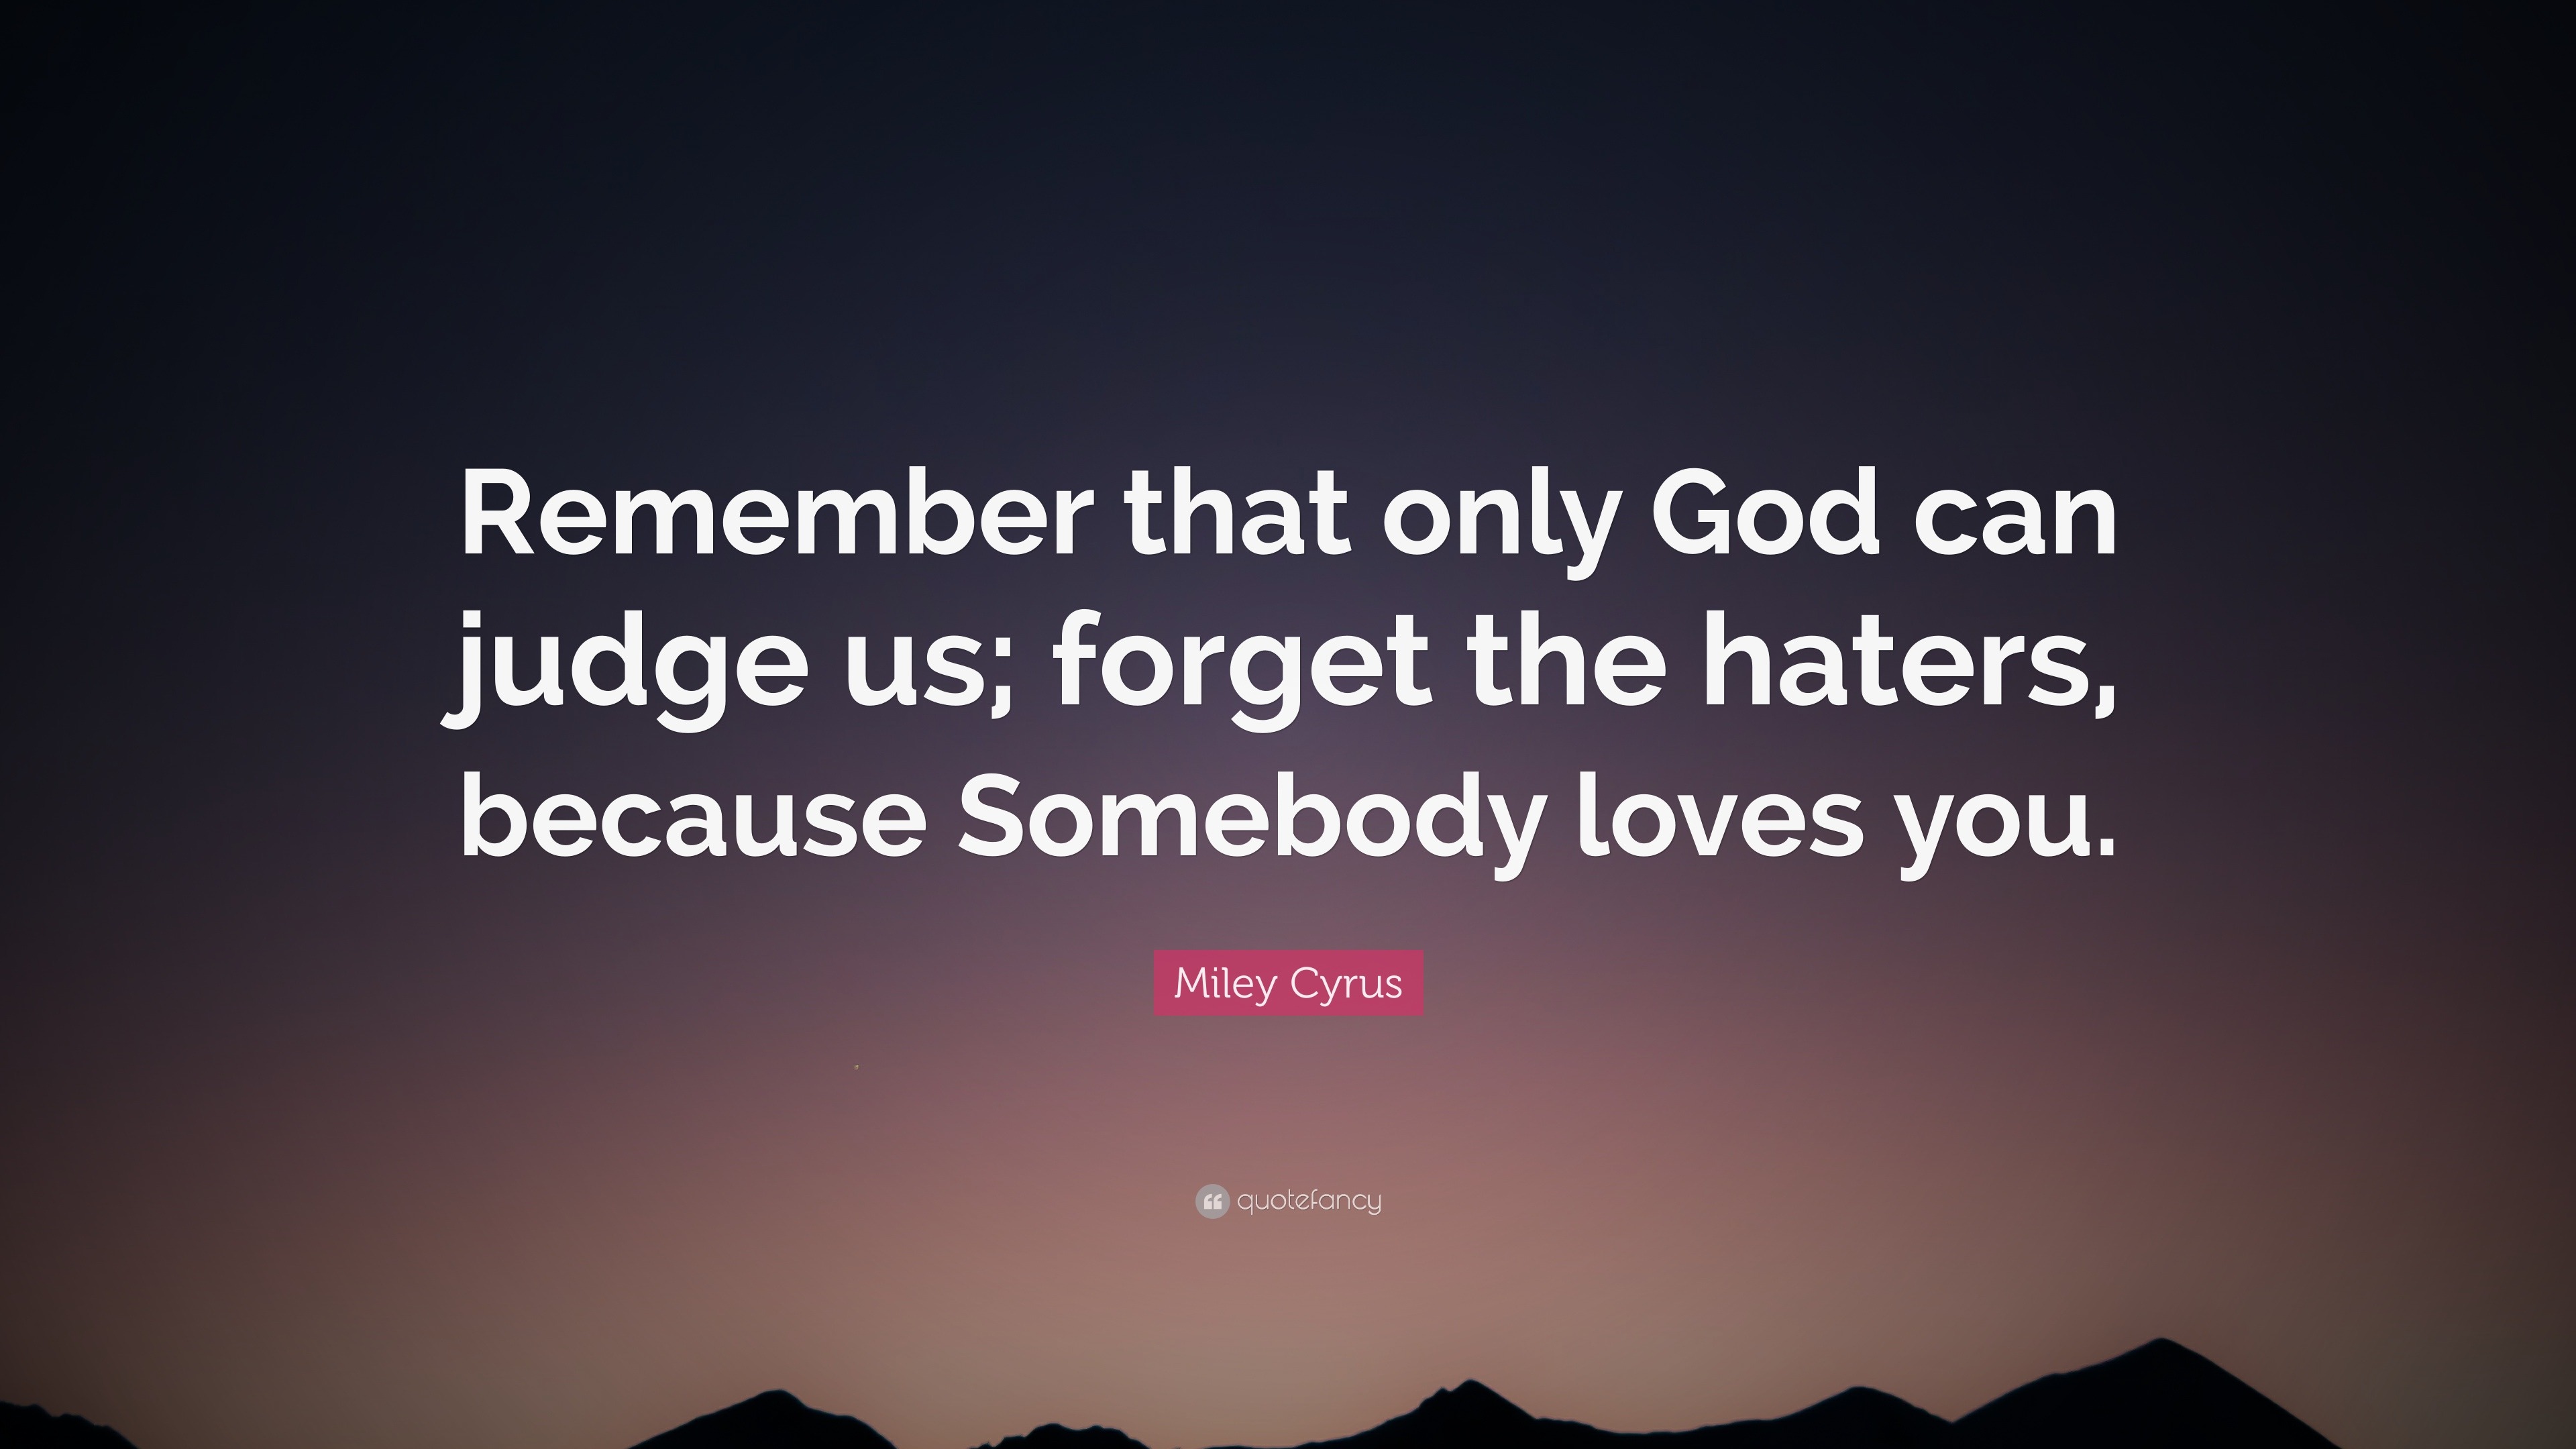 Miley Cyrus Quote “Remember that only God can judge us for the haters